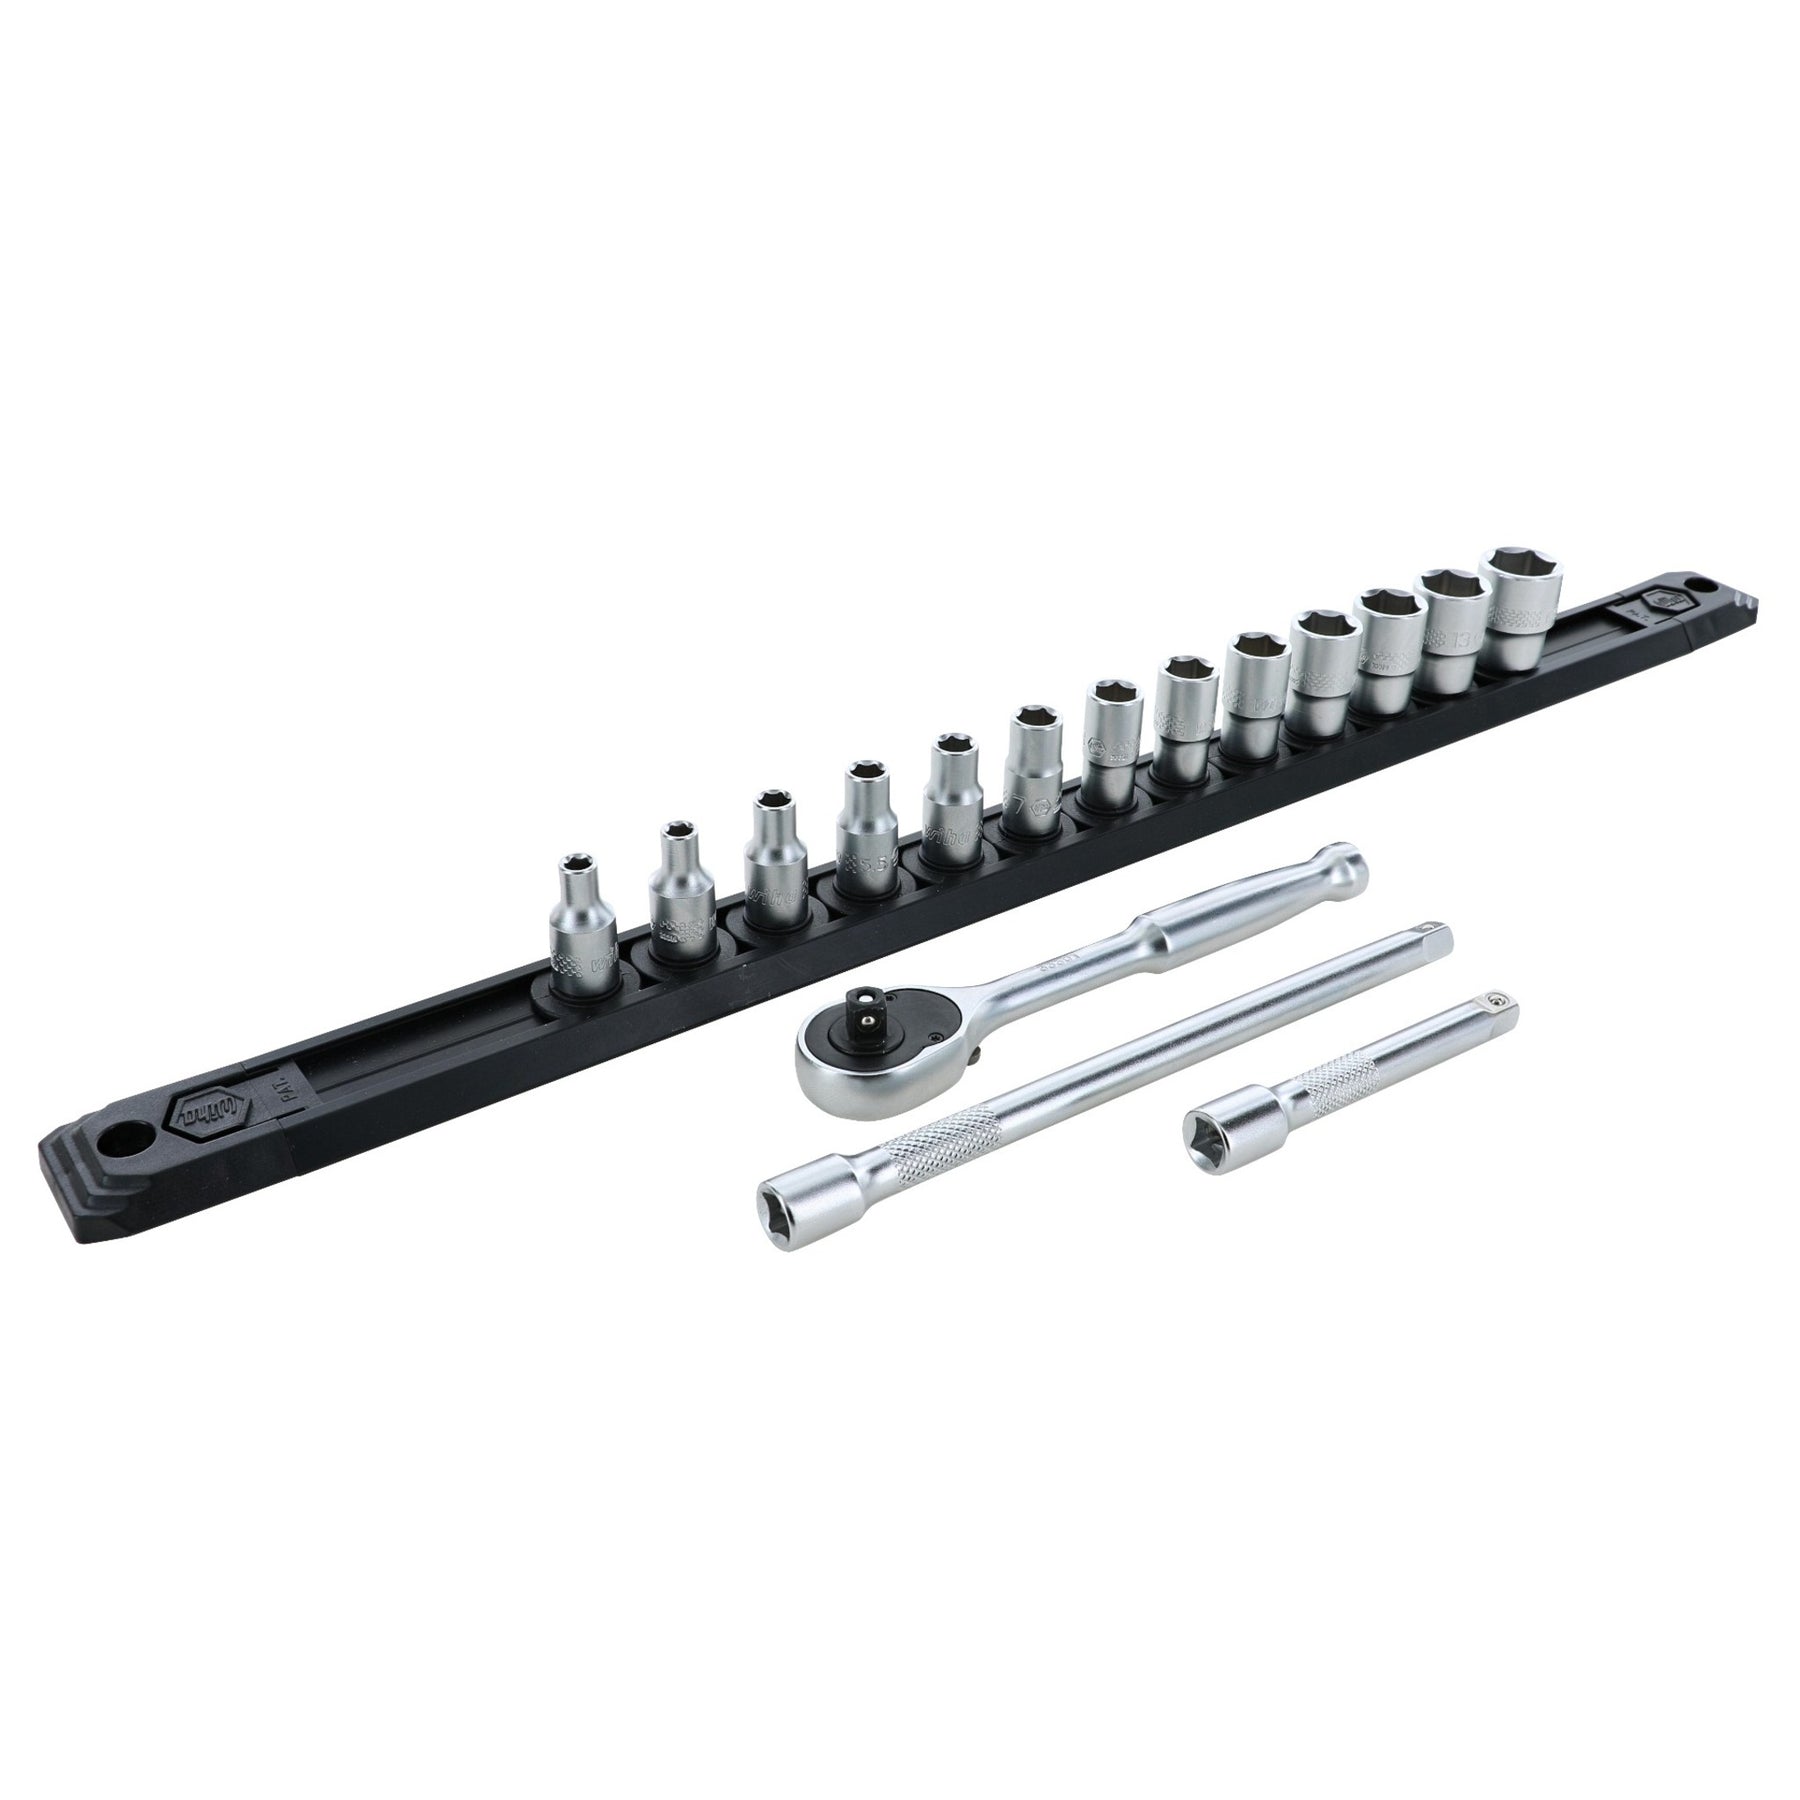 16 Piece Professional Socket and Ratchet Set with 3 and 6 Inch Extension Bars - Metric